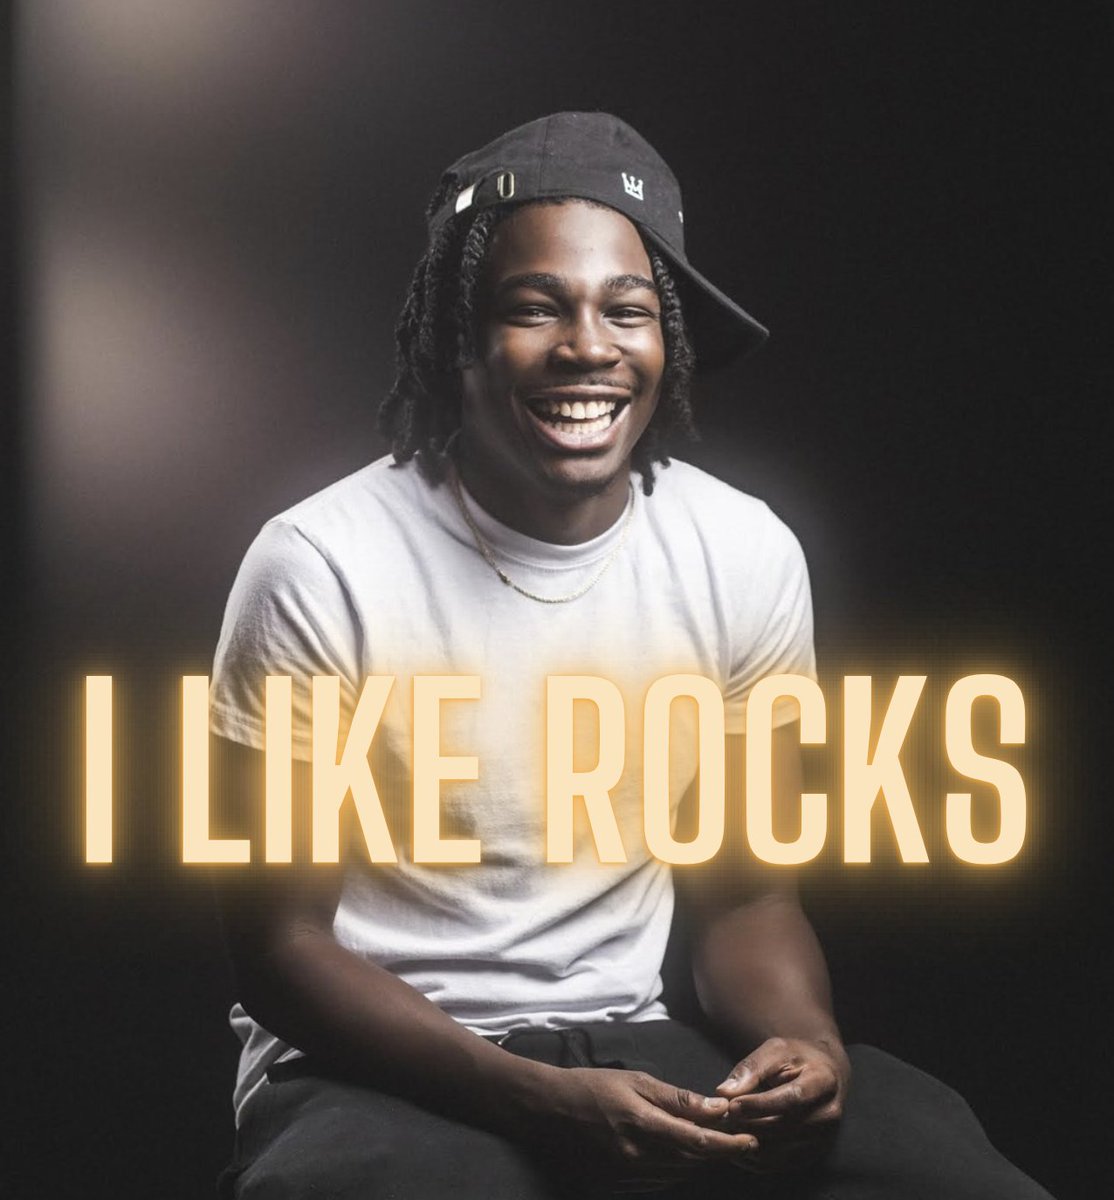 Kam Patterson, rock aficionado, added a show to his already full weekend with us next month! Six shows total, two already sold-out. Get your tickets now‼️ hilarities.com/events/93002